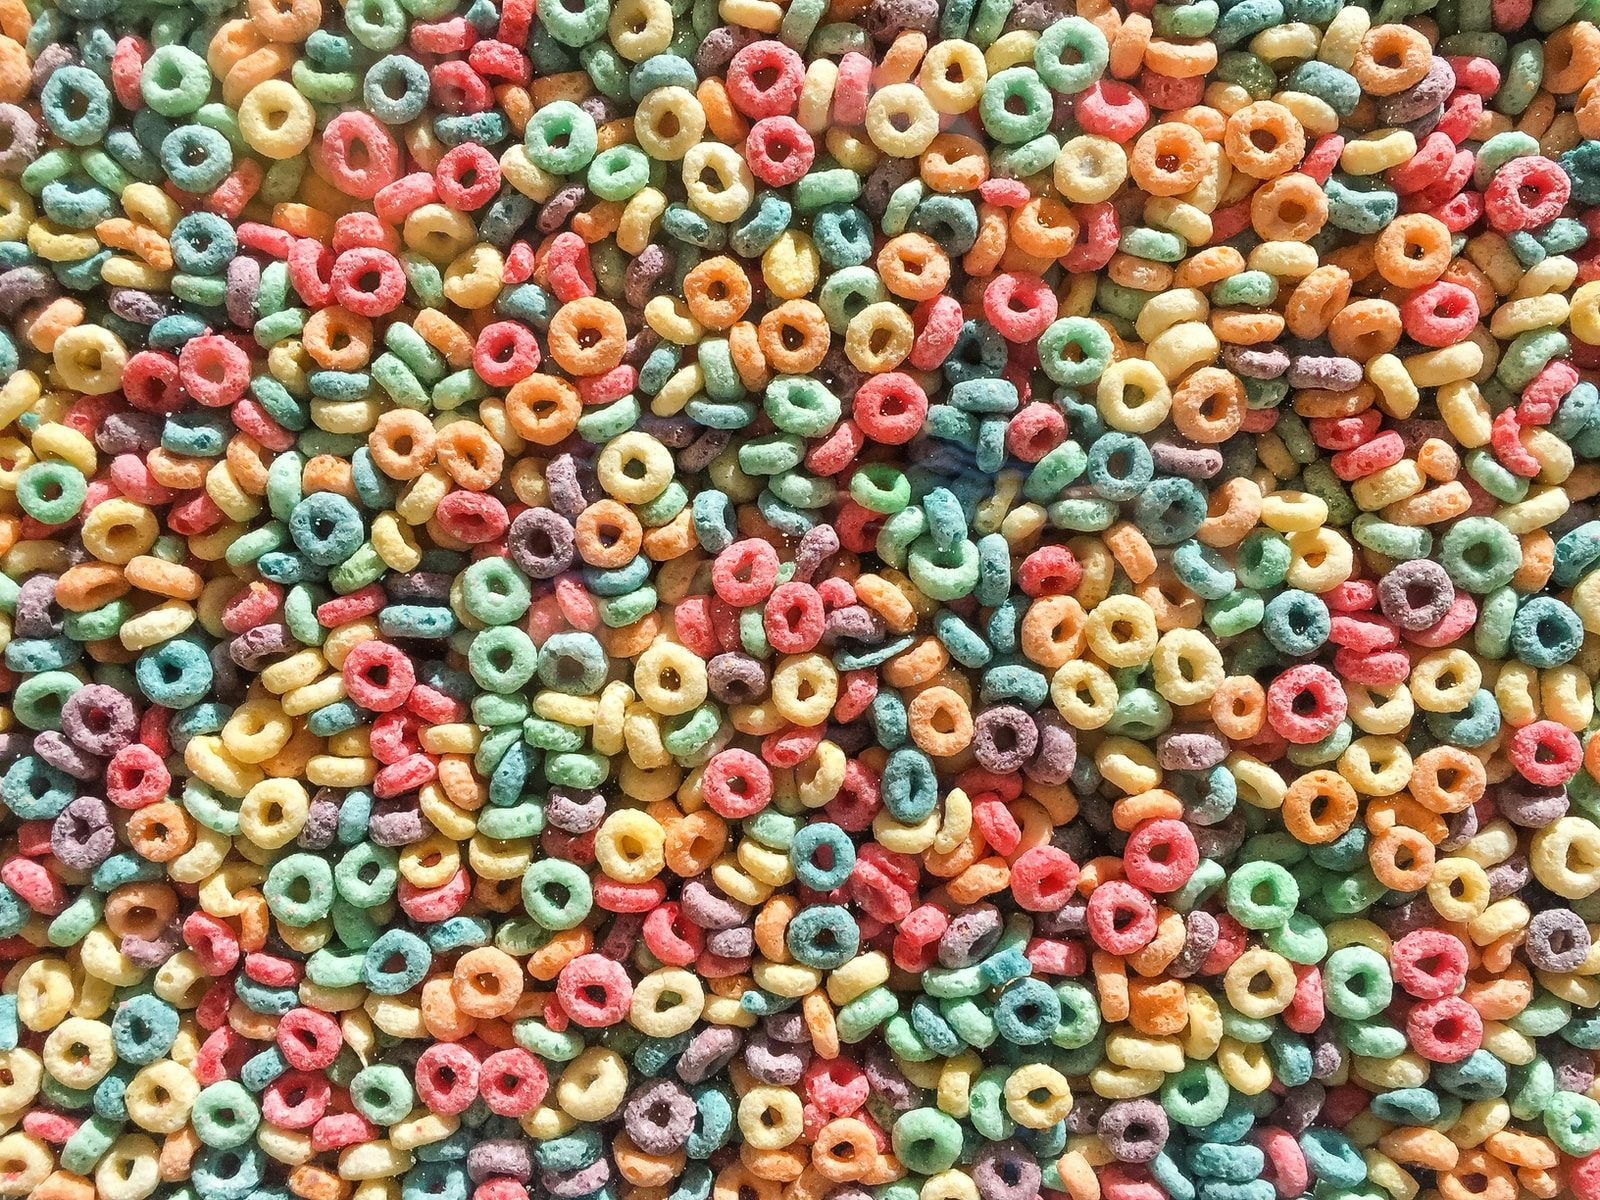 Extruded cereals extrusion